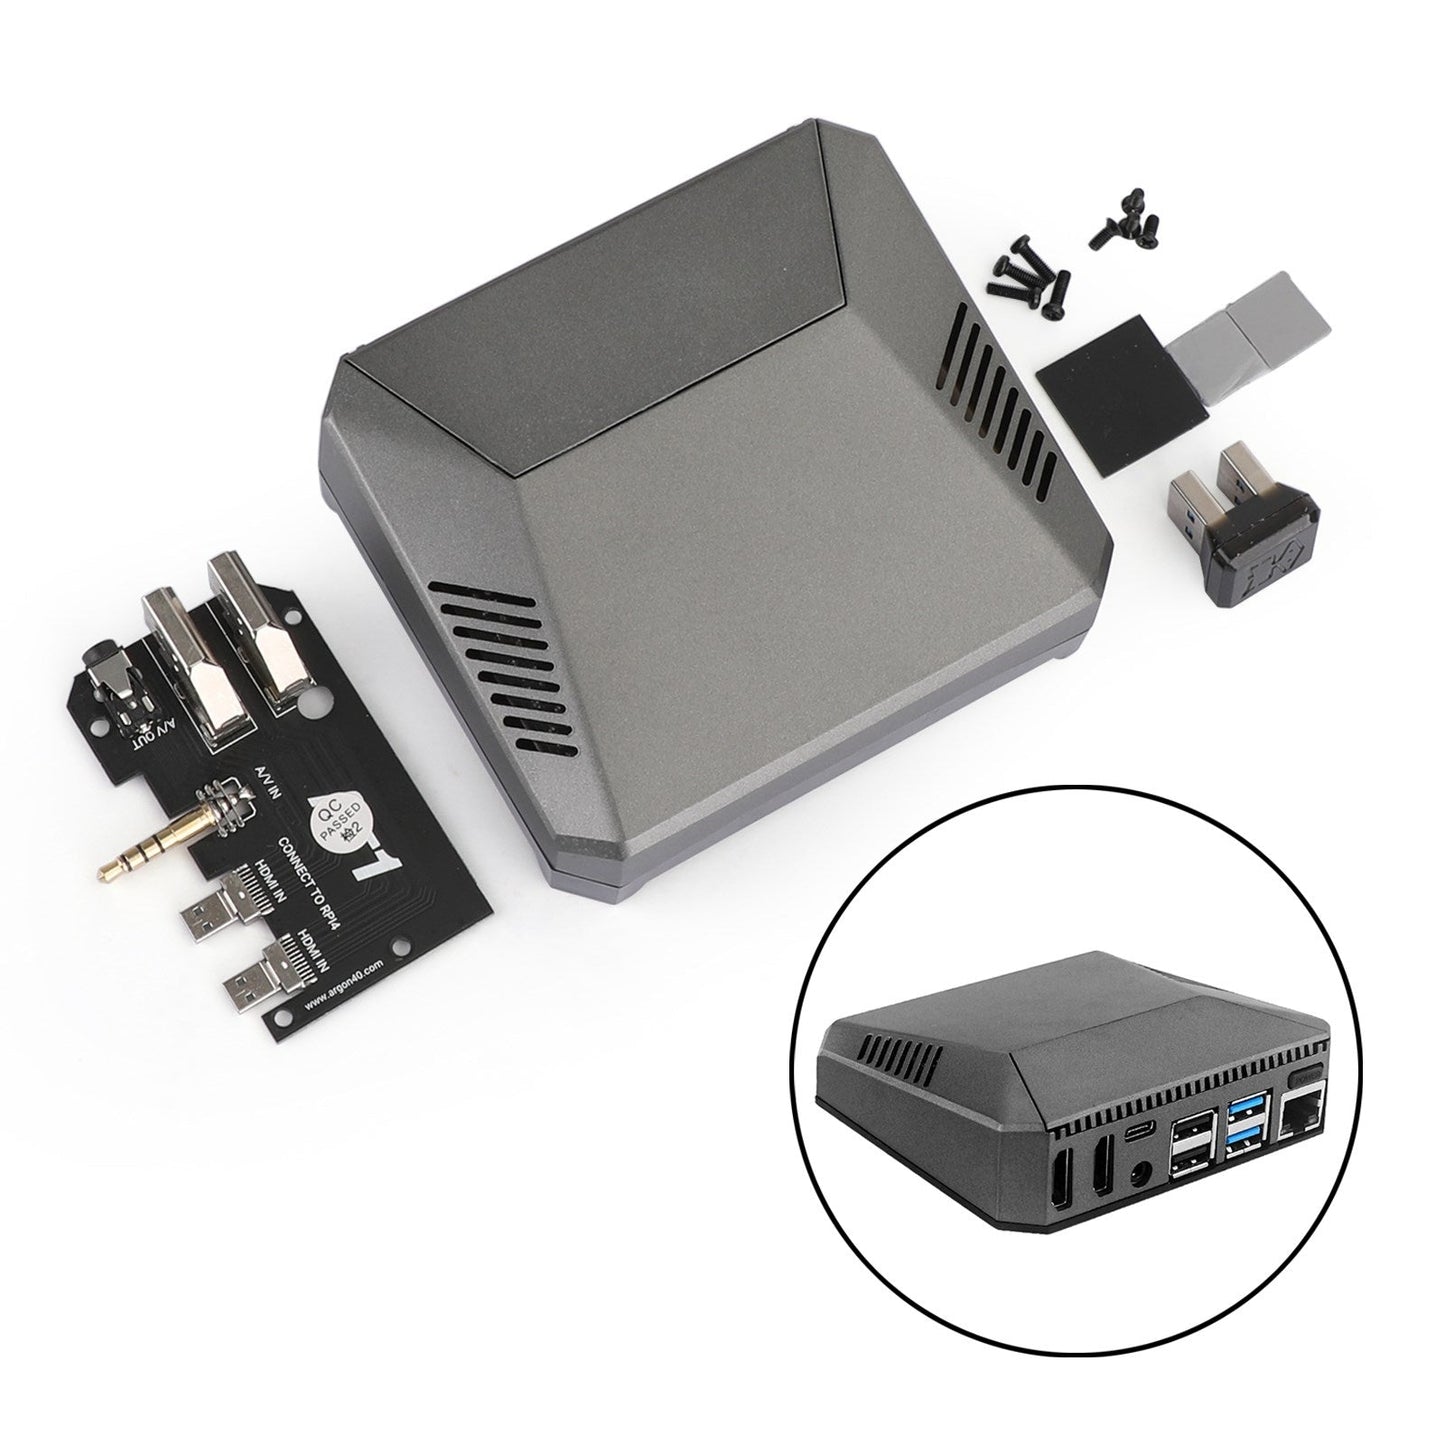 2021 Aluminum Case for Raspberry Pi 4 with Safe Power Button for Argon One